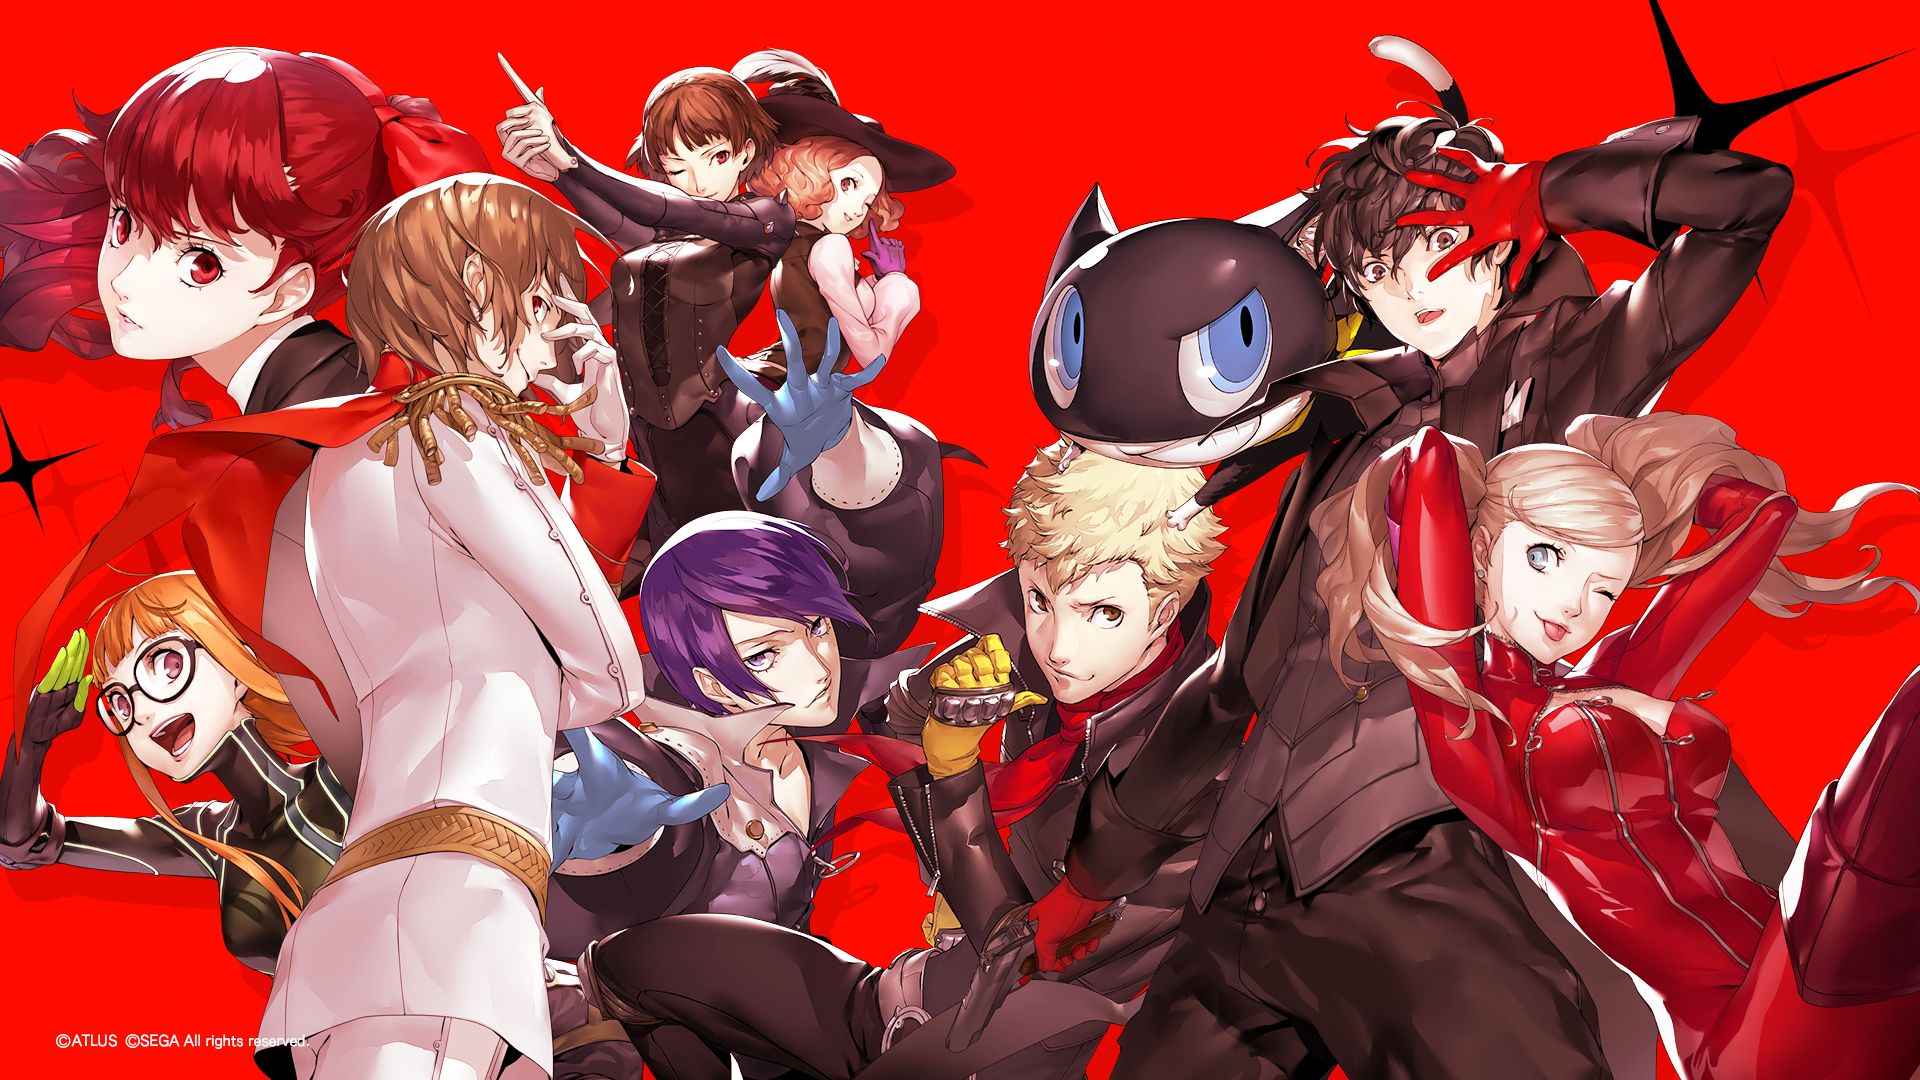 Persona 5 Royal has shipped 1 million units on current-gen platforms